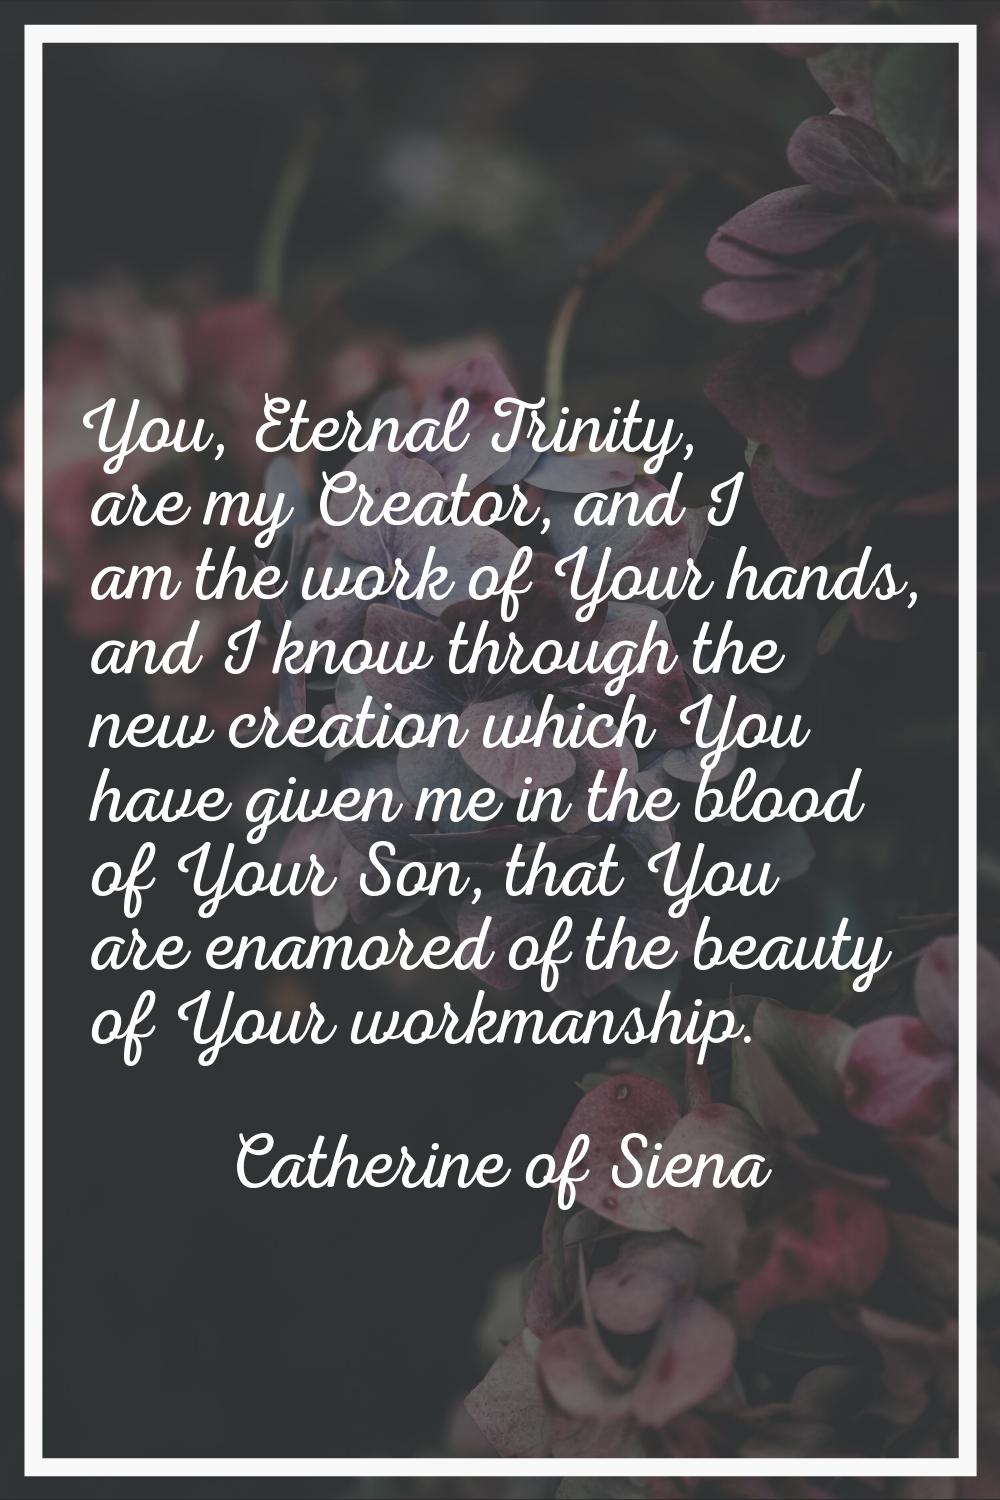 You, Eternal Trinity, are my Creator, and I am the work of Your hands, and I know through the new c